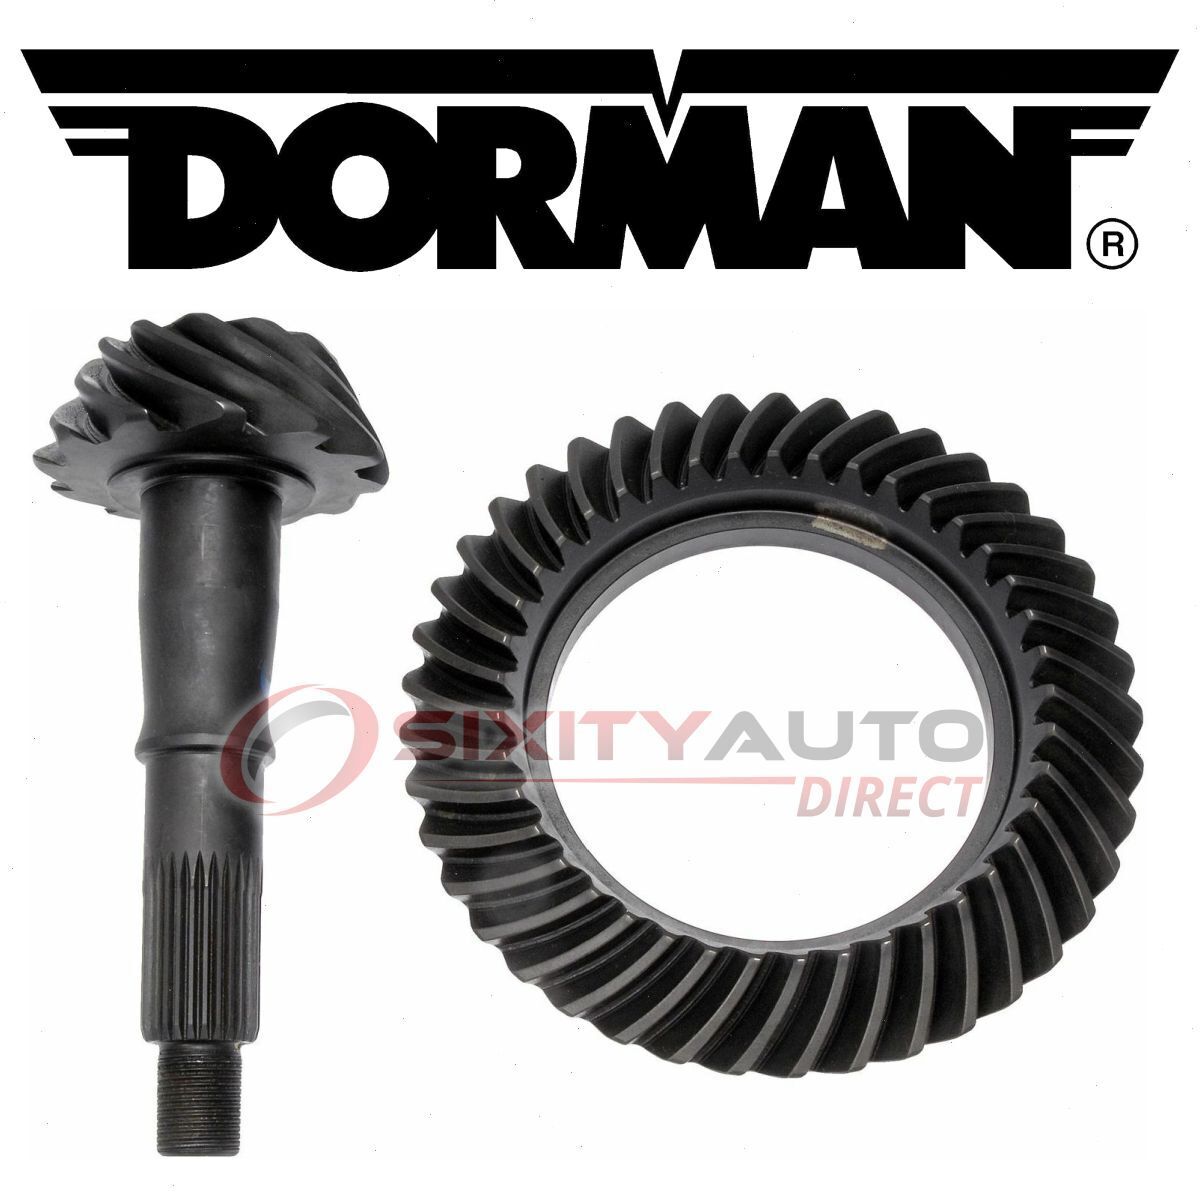 Dorman Rear Differential Ring & Pinion for 1978-1988 Oldsmobile Cutlass zm